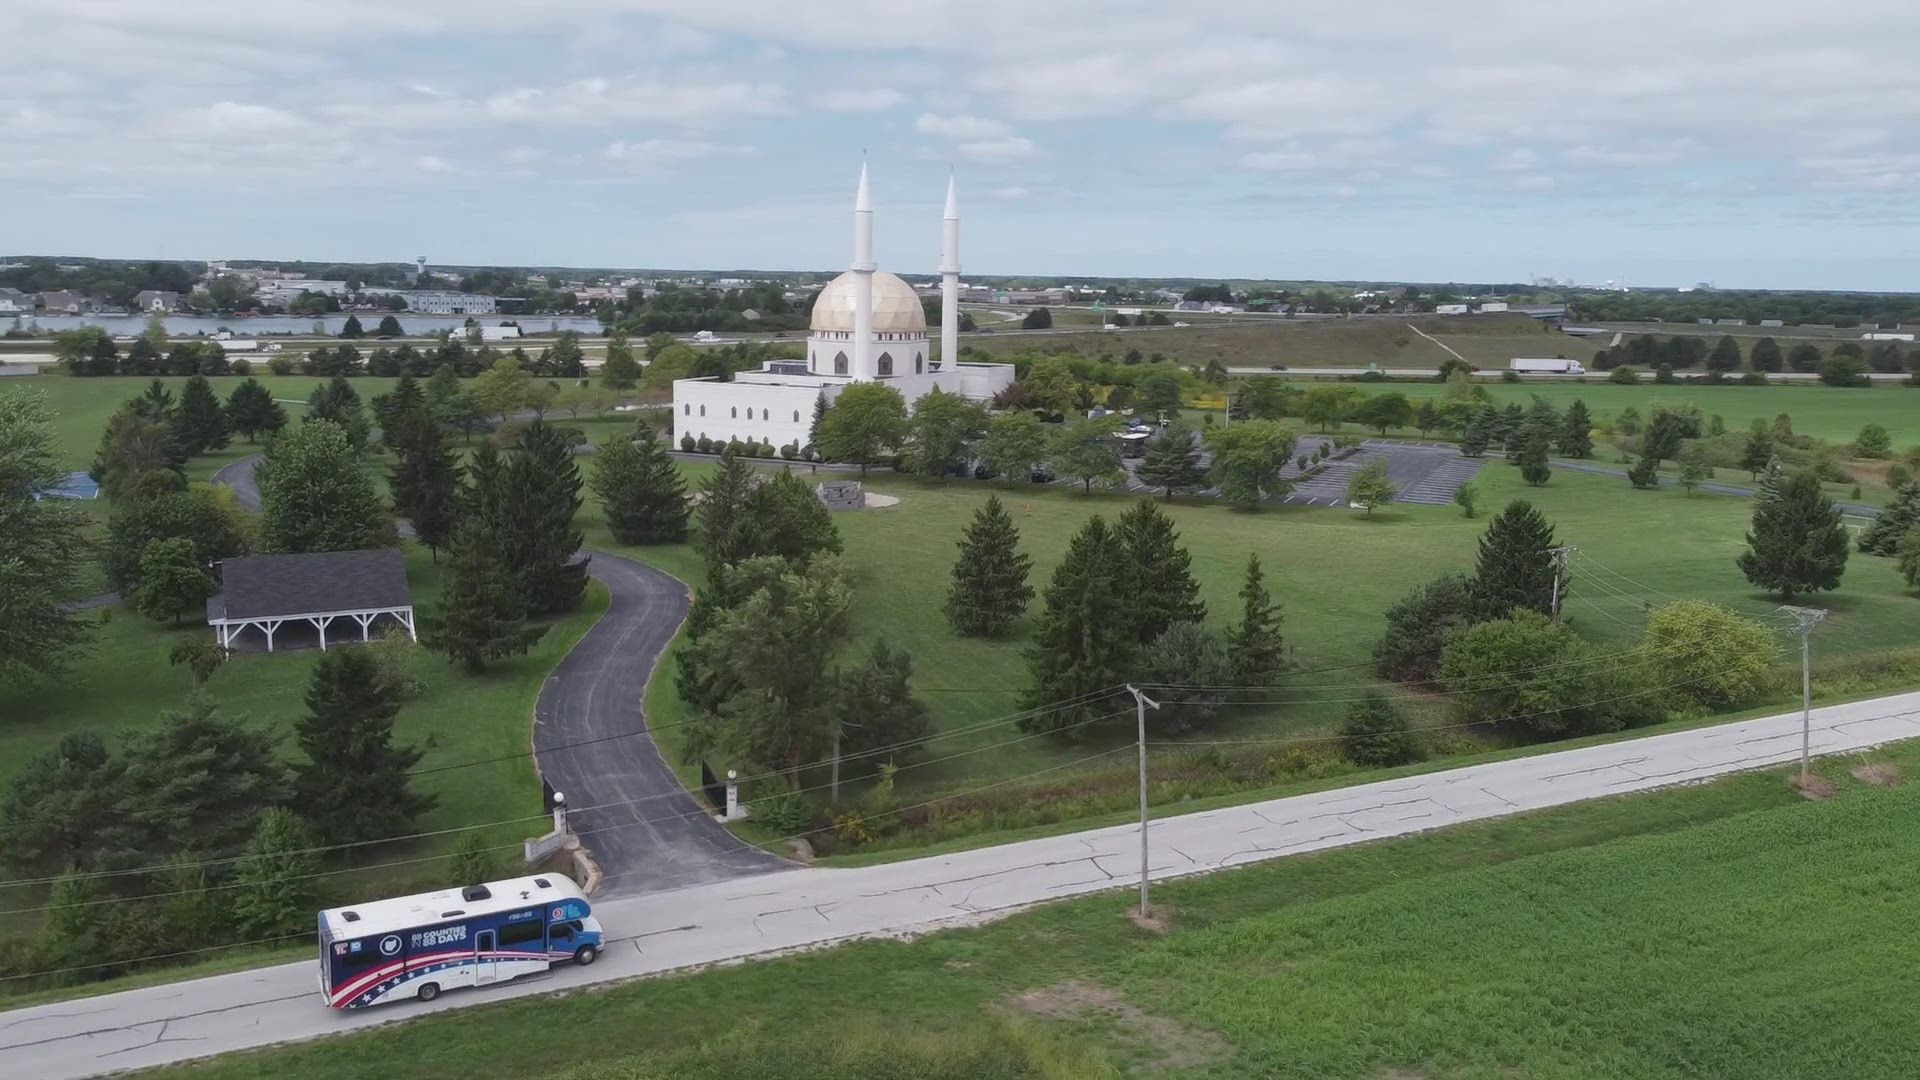 The time after 9/11 was one filled with high tensions, and talking to Muslims in Wood County shows how the greater community banded together.